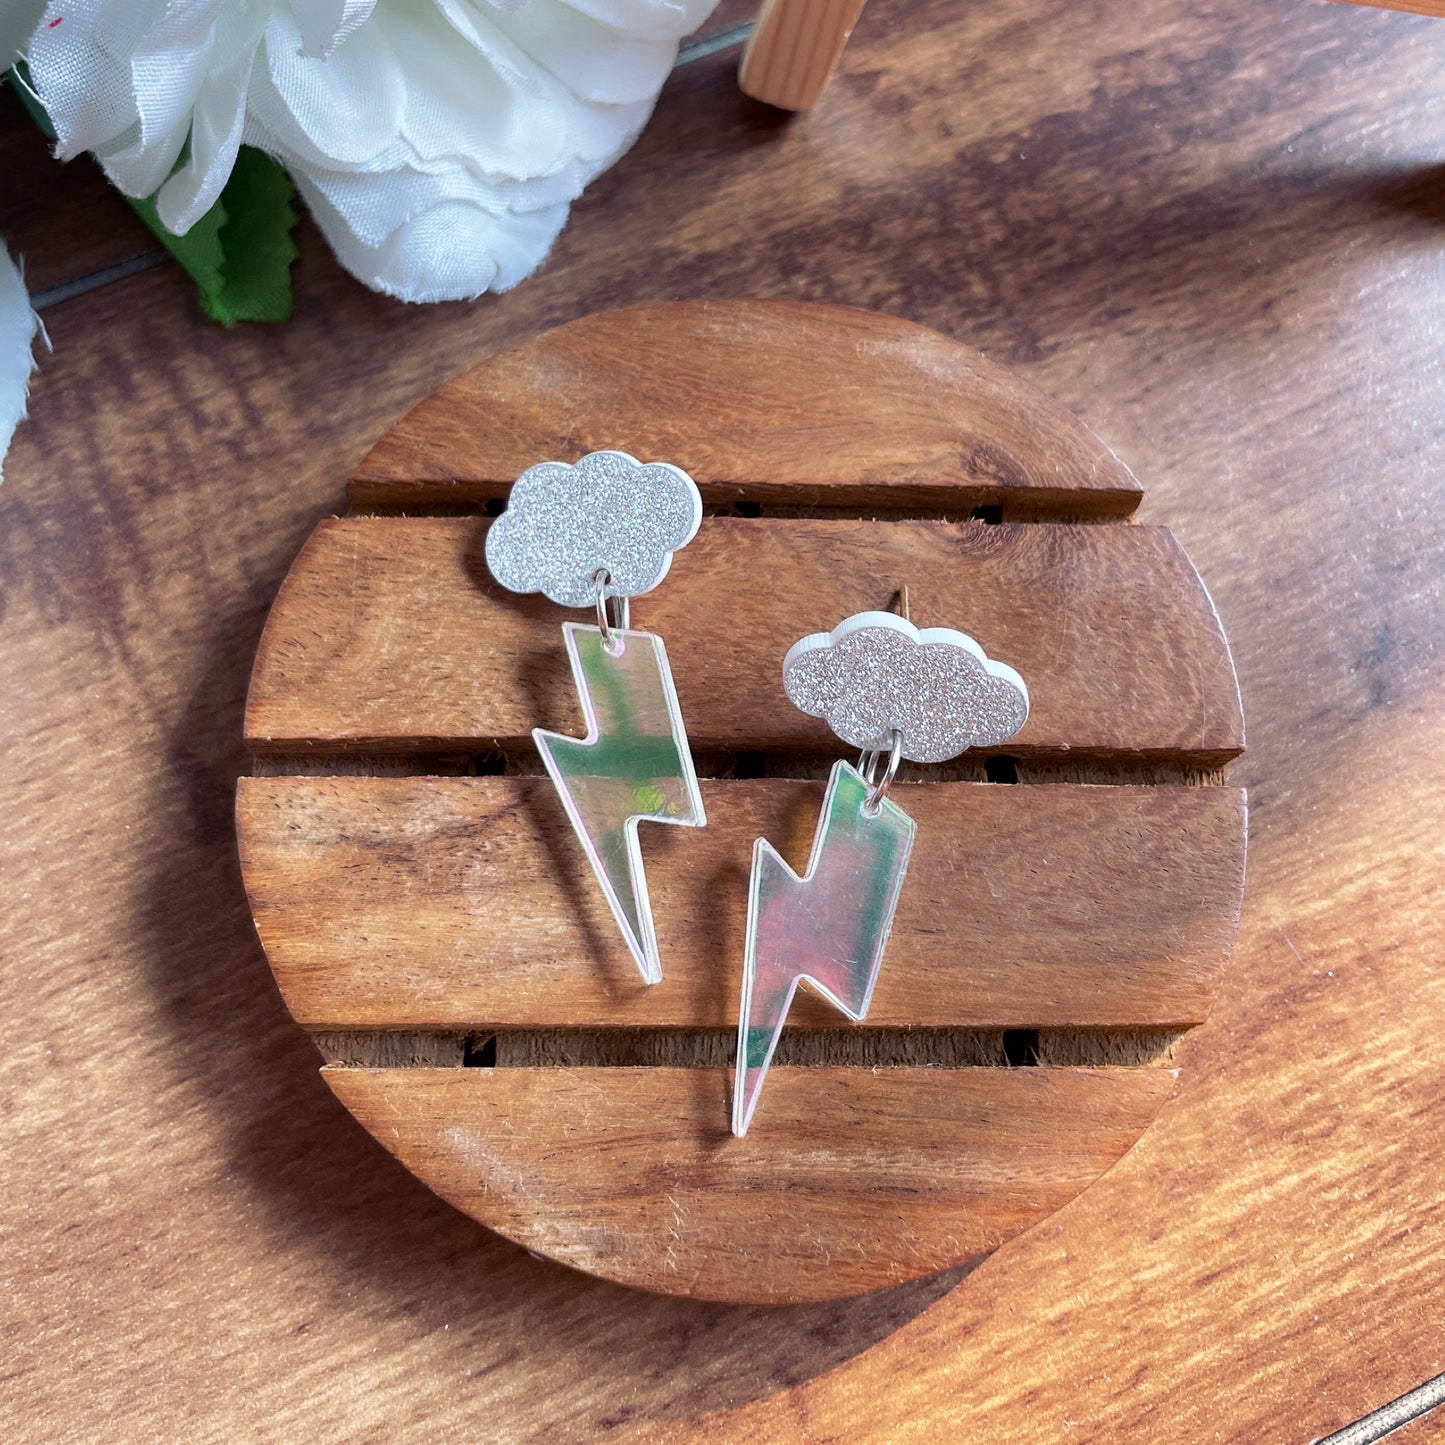 Thunder Cloud Earrings - Holographic and silver with shimmer - Nian by Nidhi - in a brown background